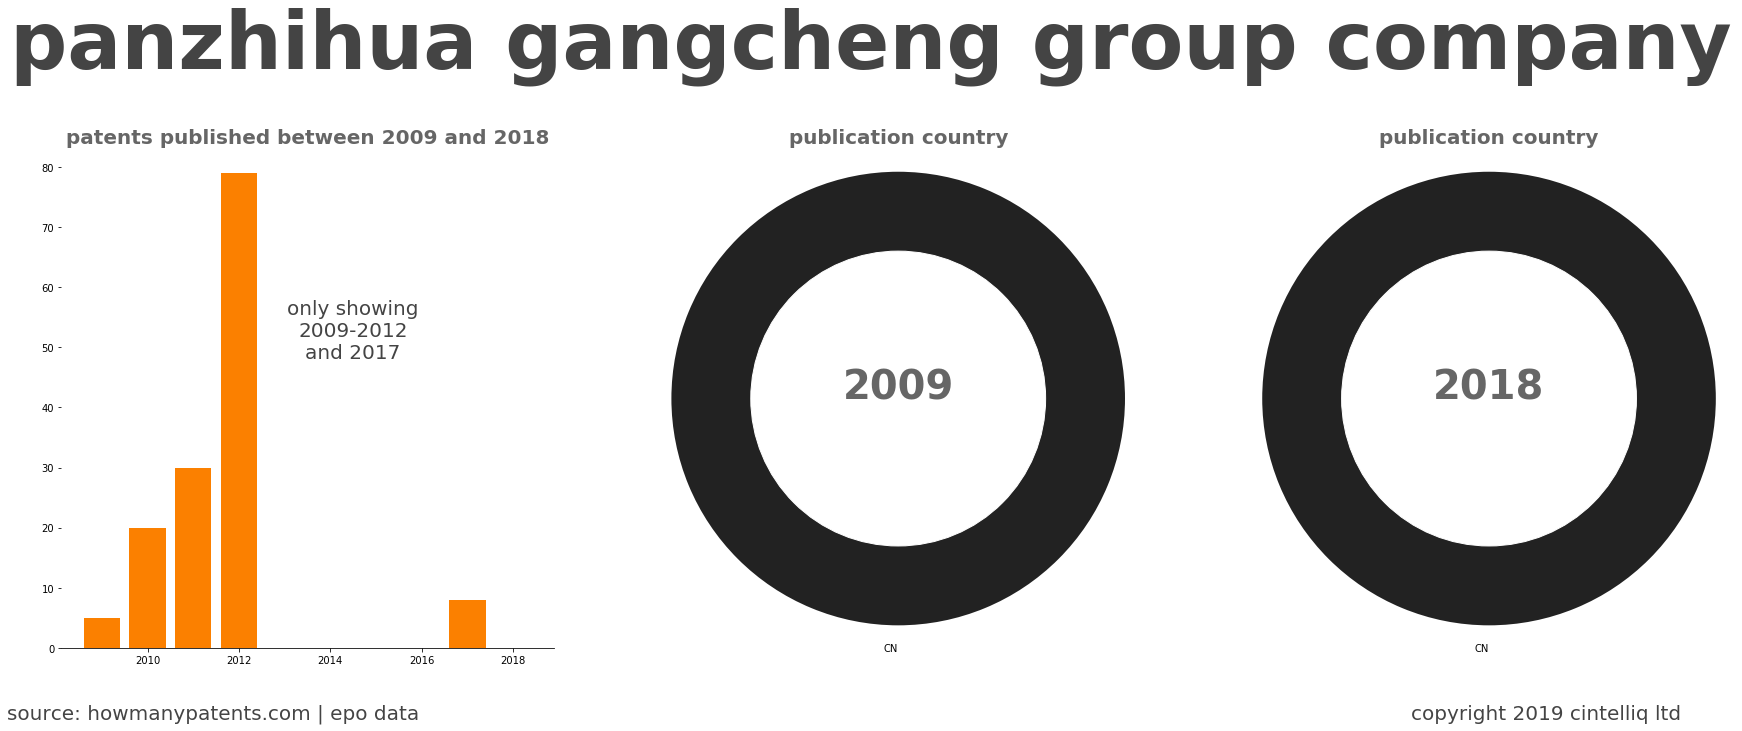 summary of patents for Panzhihua Gangcheng Group Company